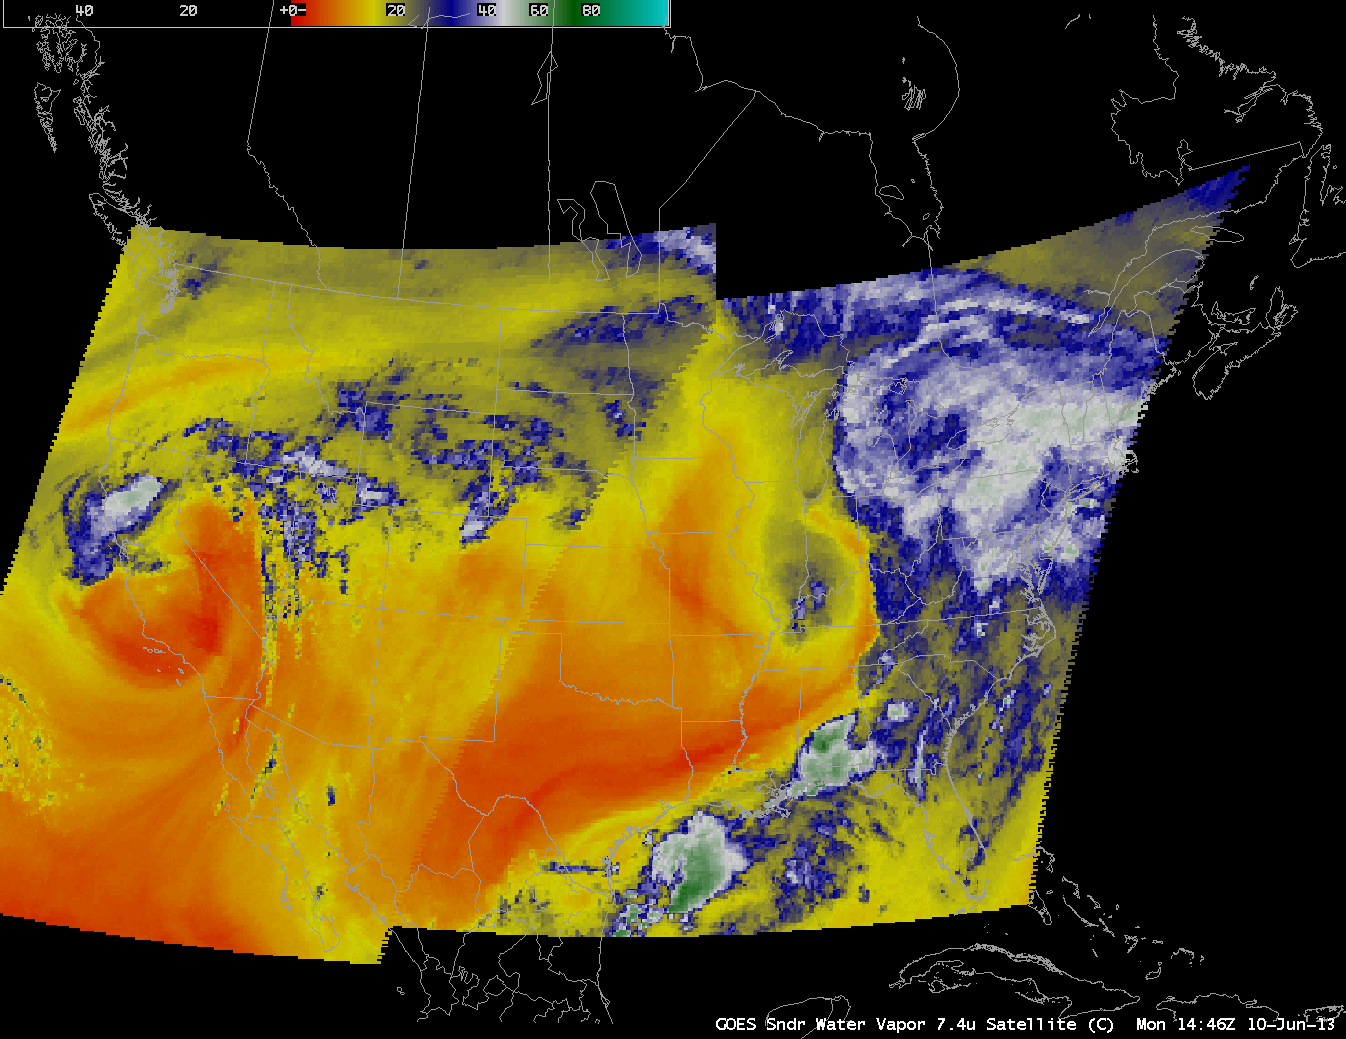 GOES-West and GOES-East Sounder 7.4 Âµm water vapor channel